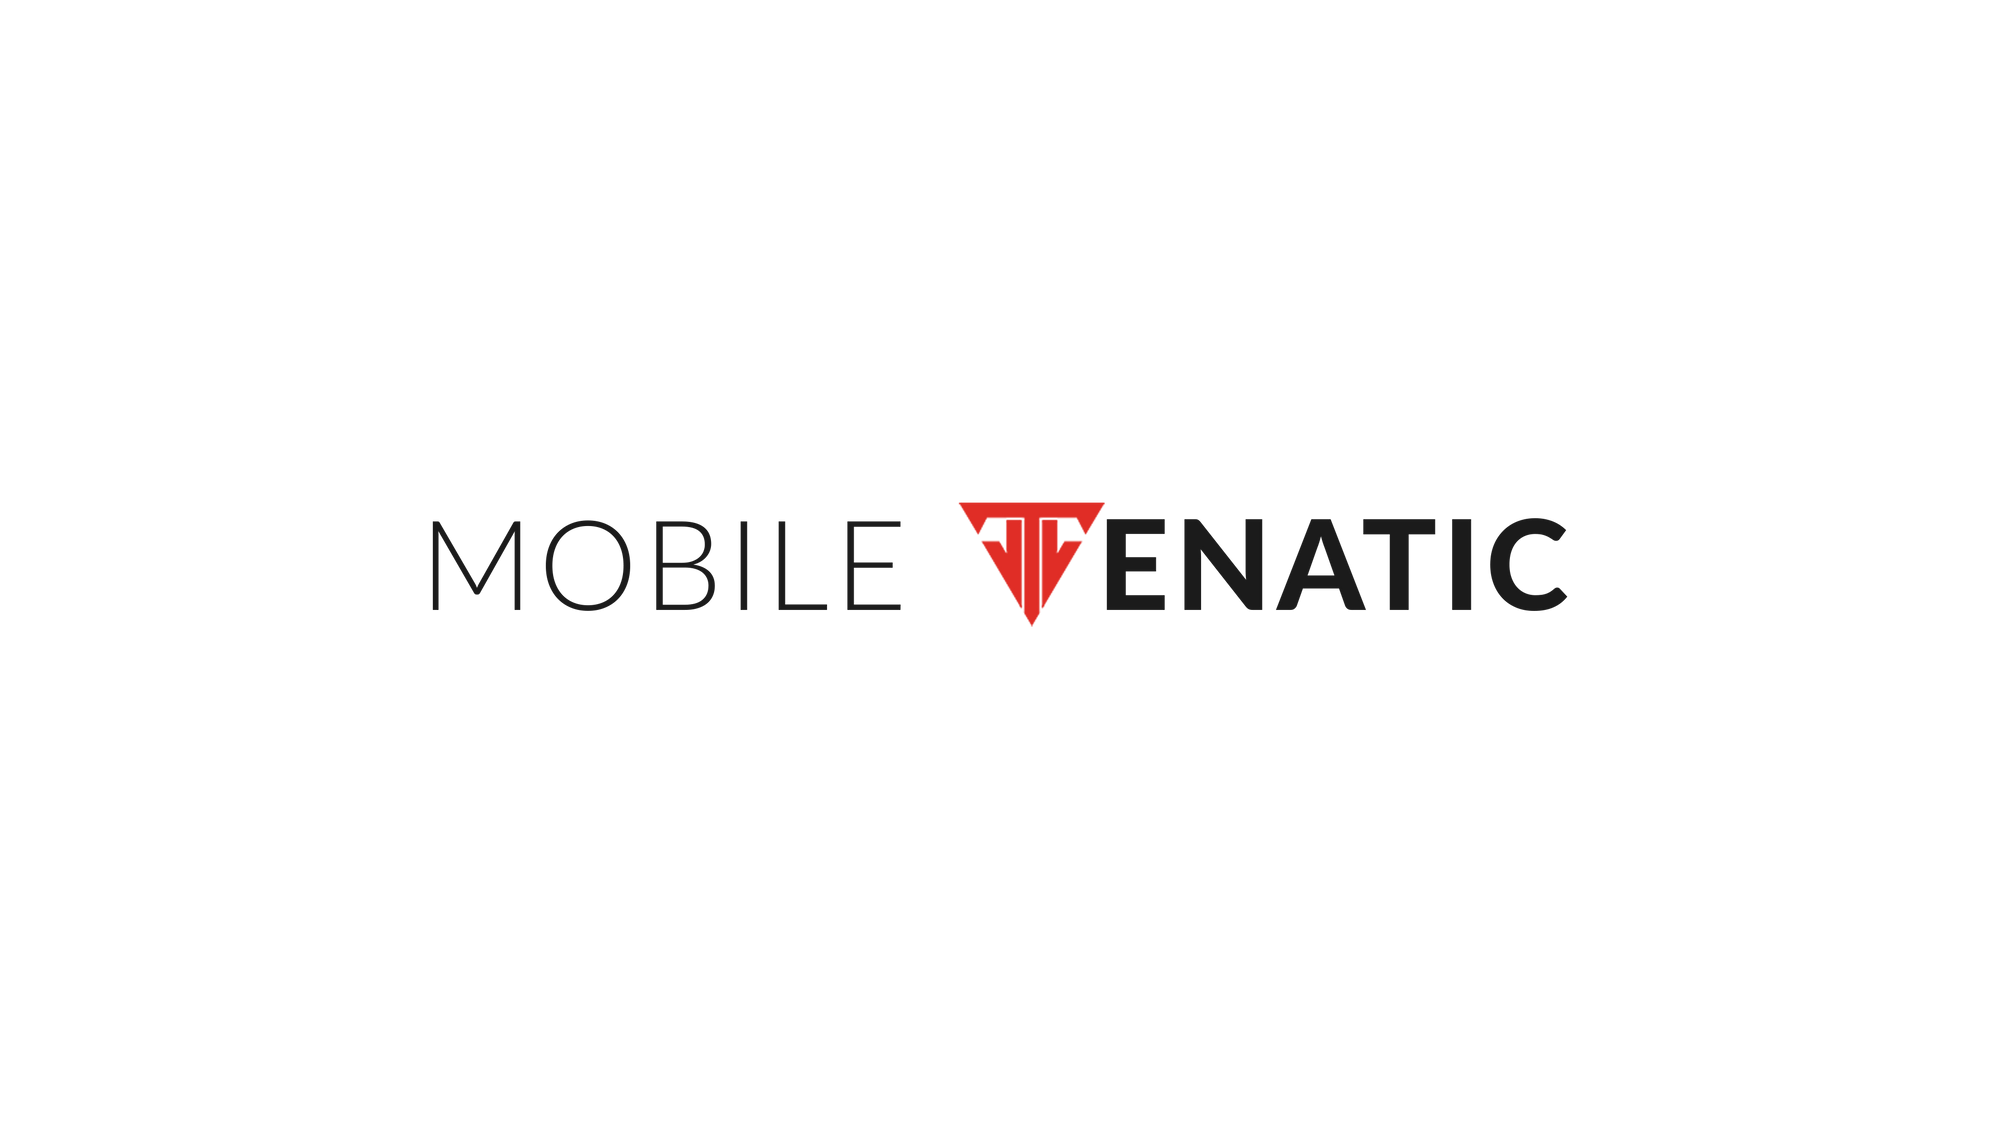 Introducing Mobile Venatic™ - Obsessed Mobile Hunter